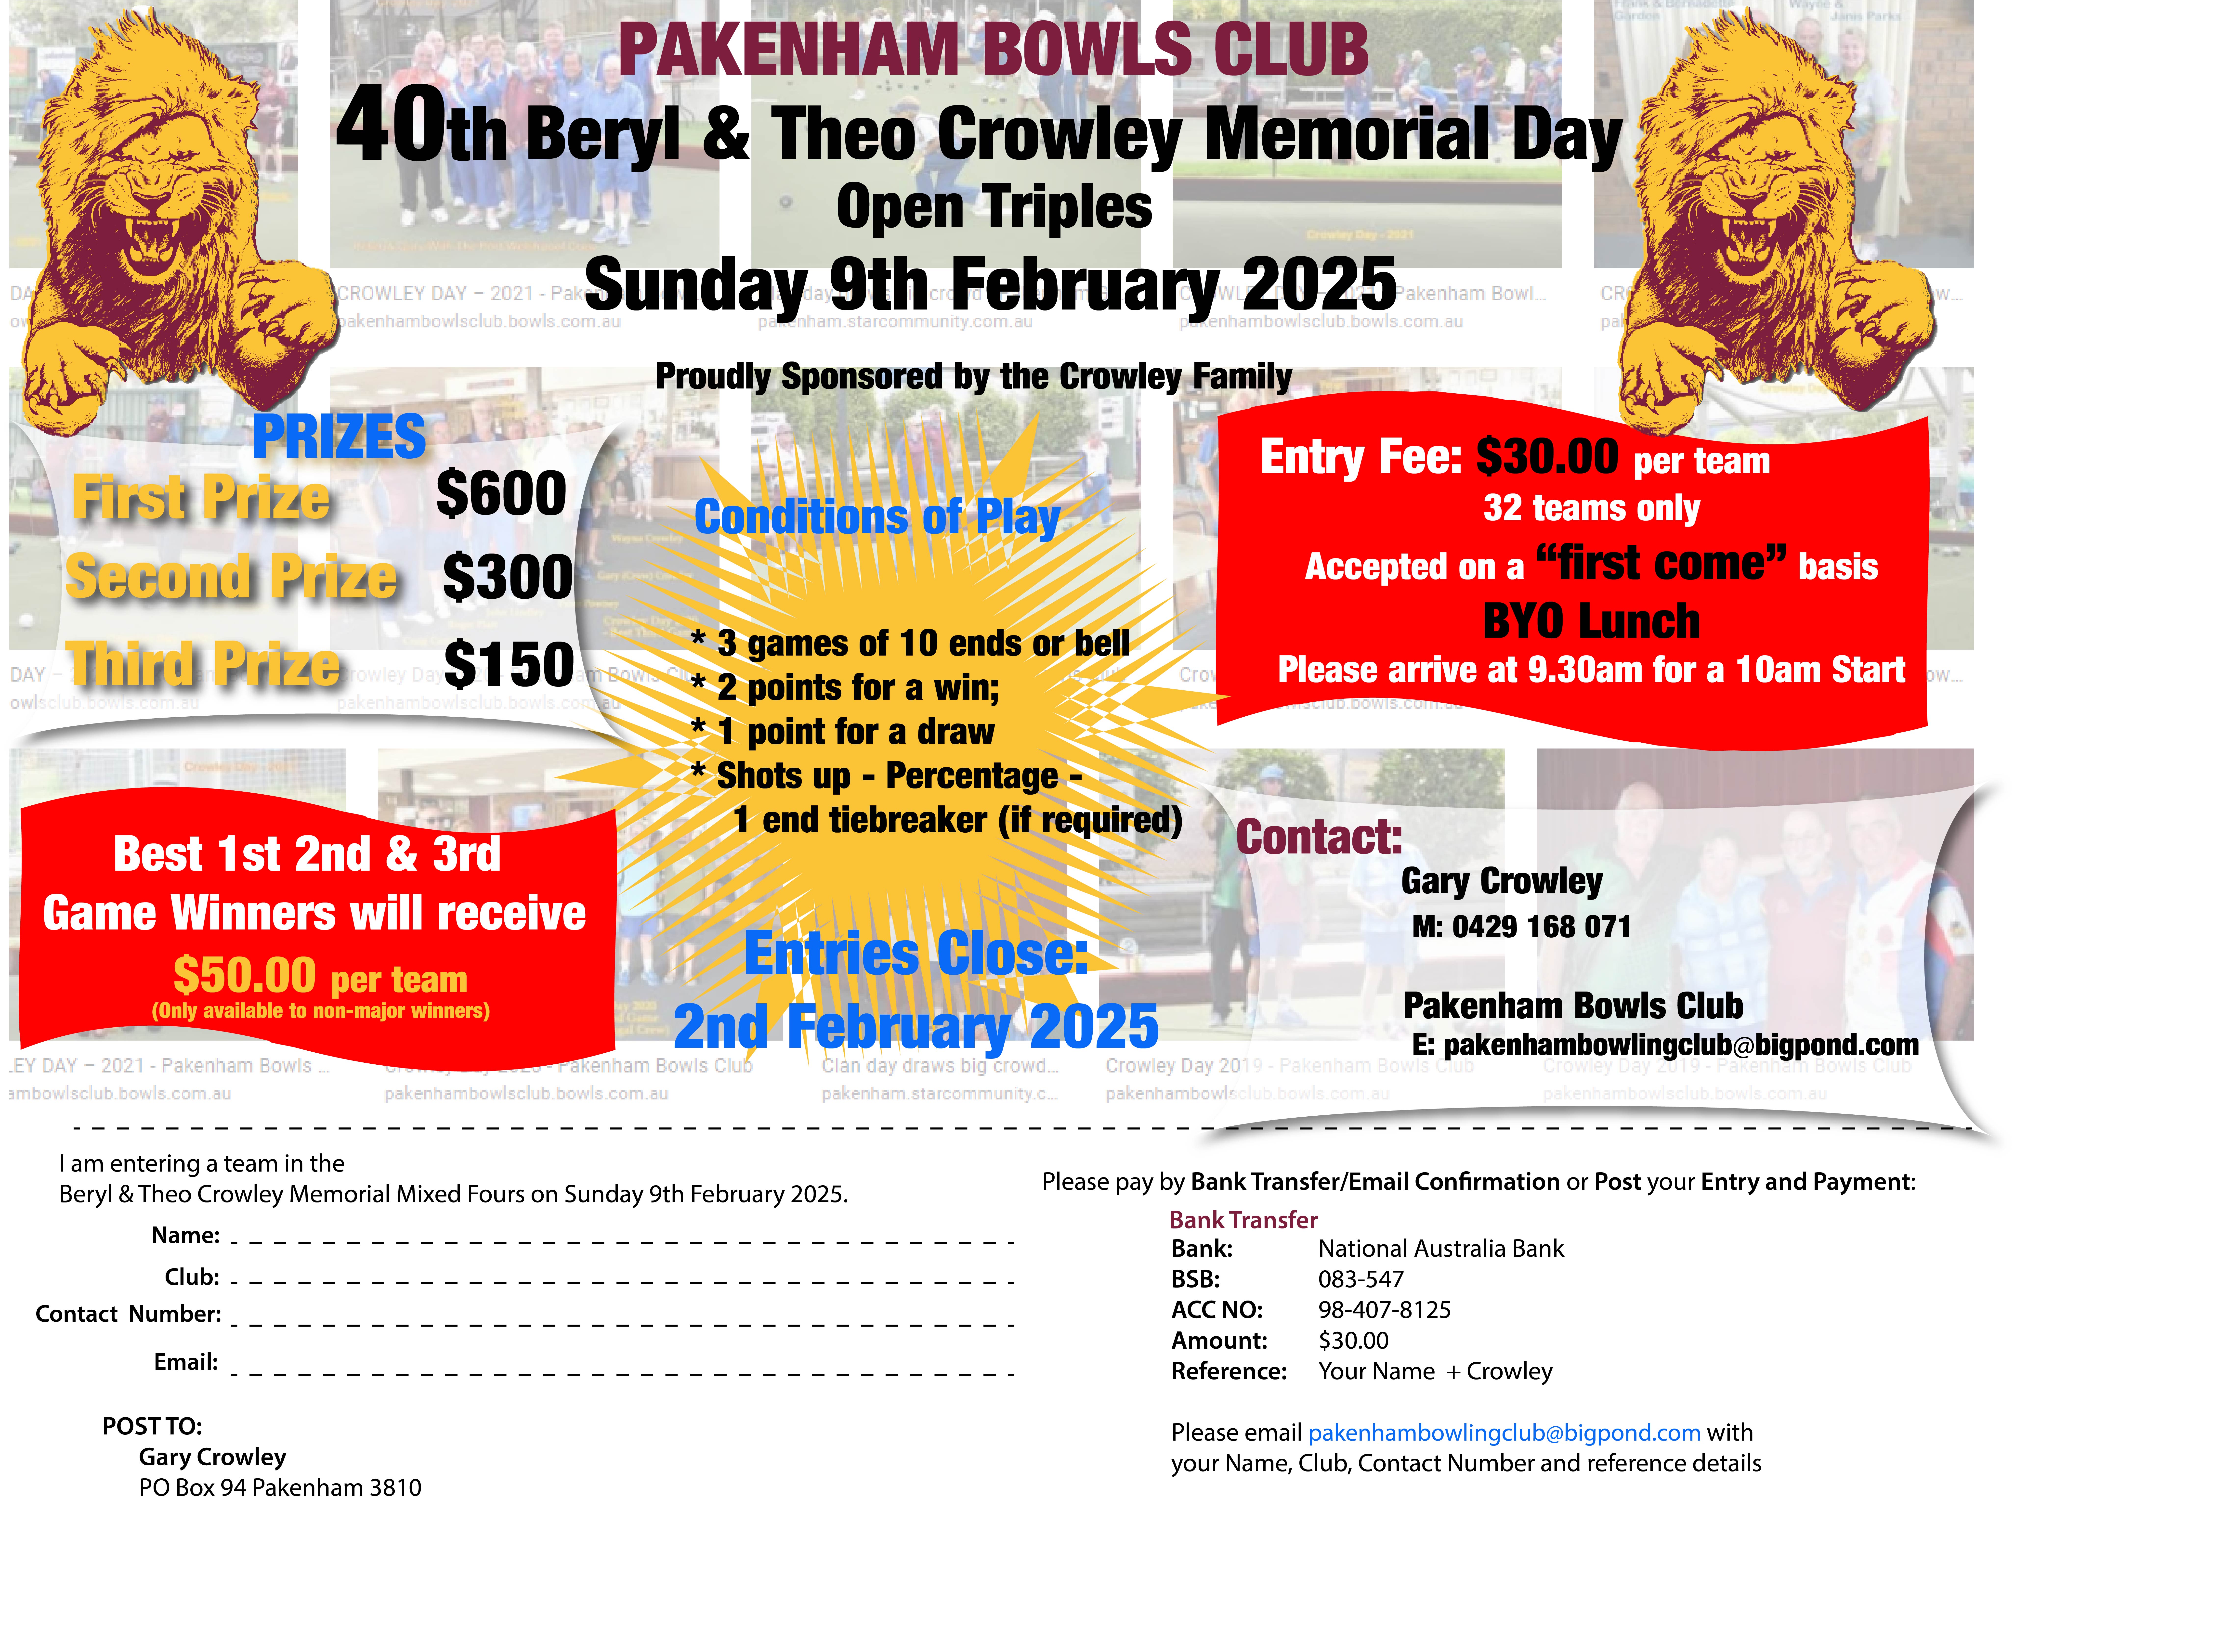 40th Beryl & Theo Crowley Memorial Day 2025 - Open Triples Sunday 9th February 2025 Contact Gary Crowley 0429 168 071